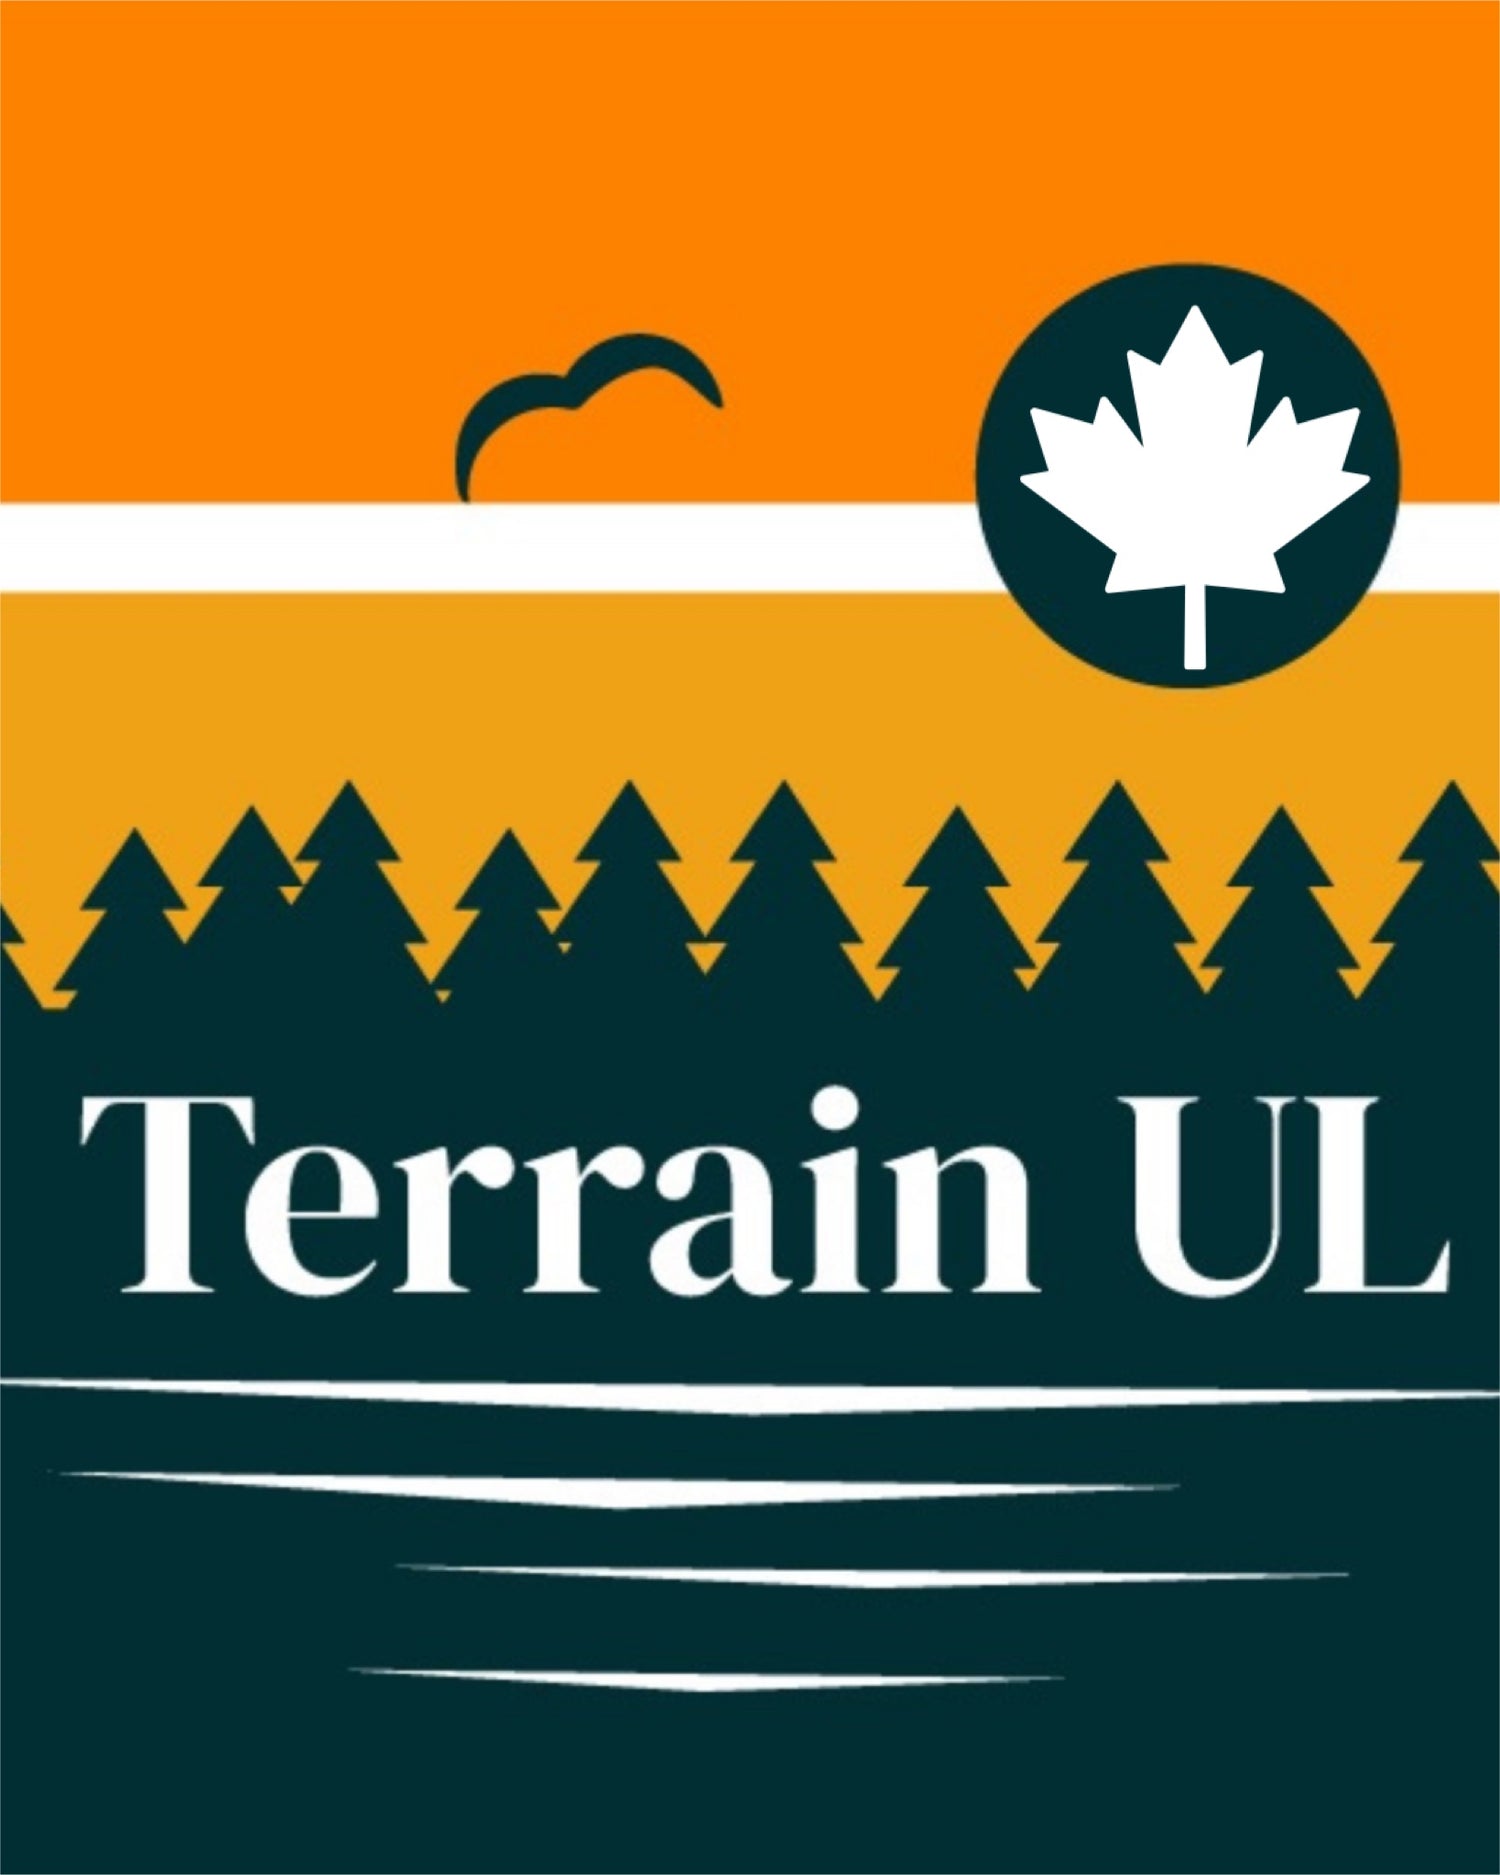 Image of Terrain UL logo with bird, sun with maple leaf, trees and lake.